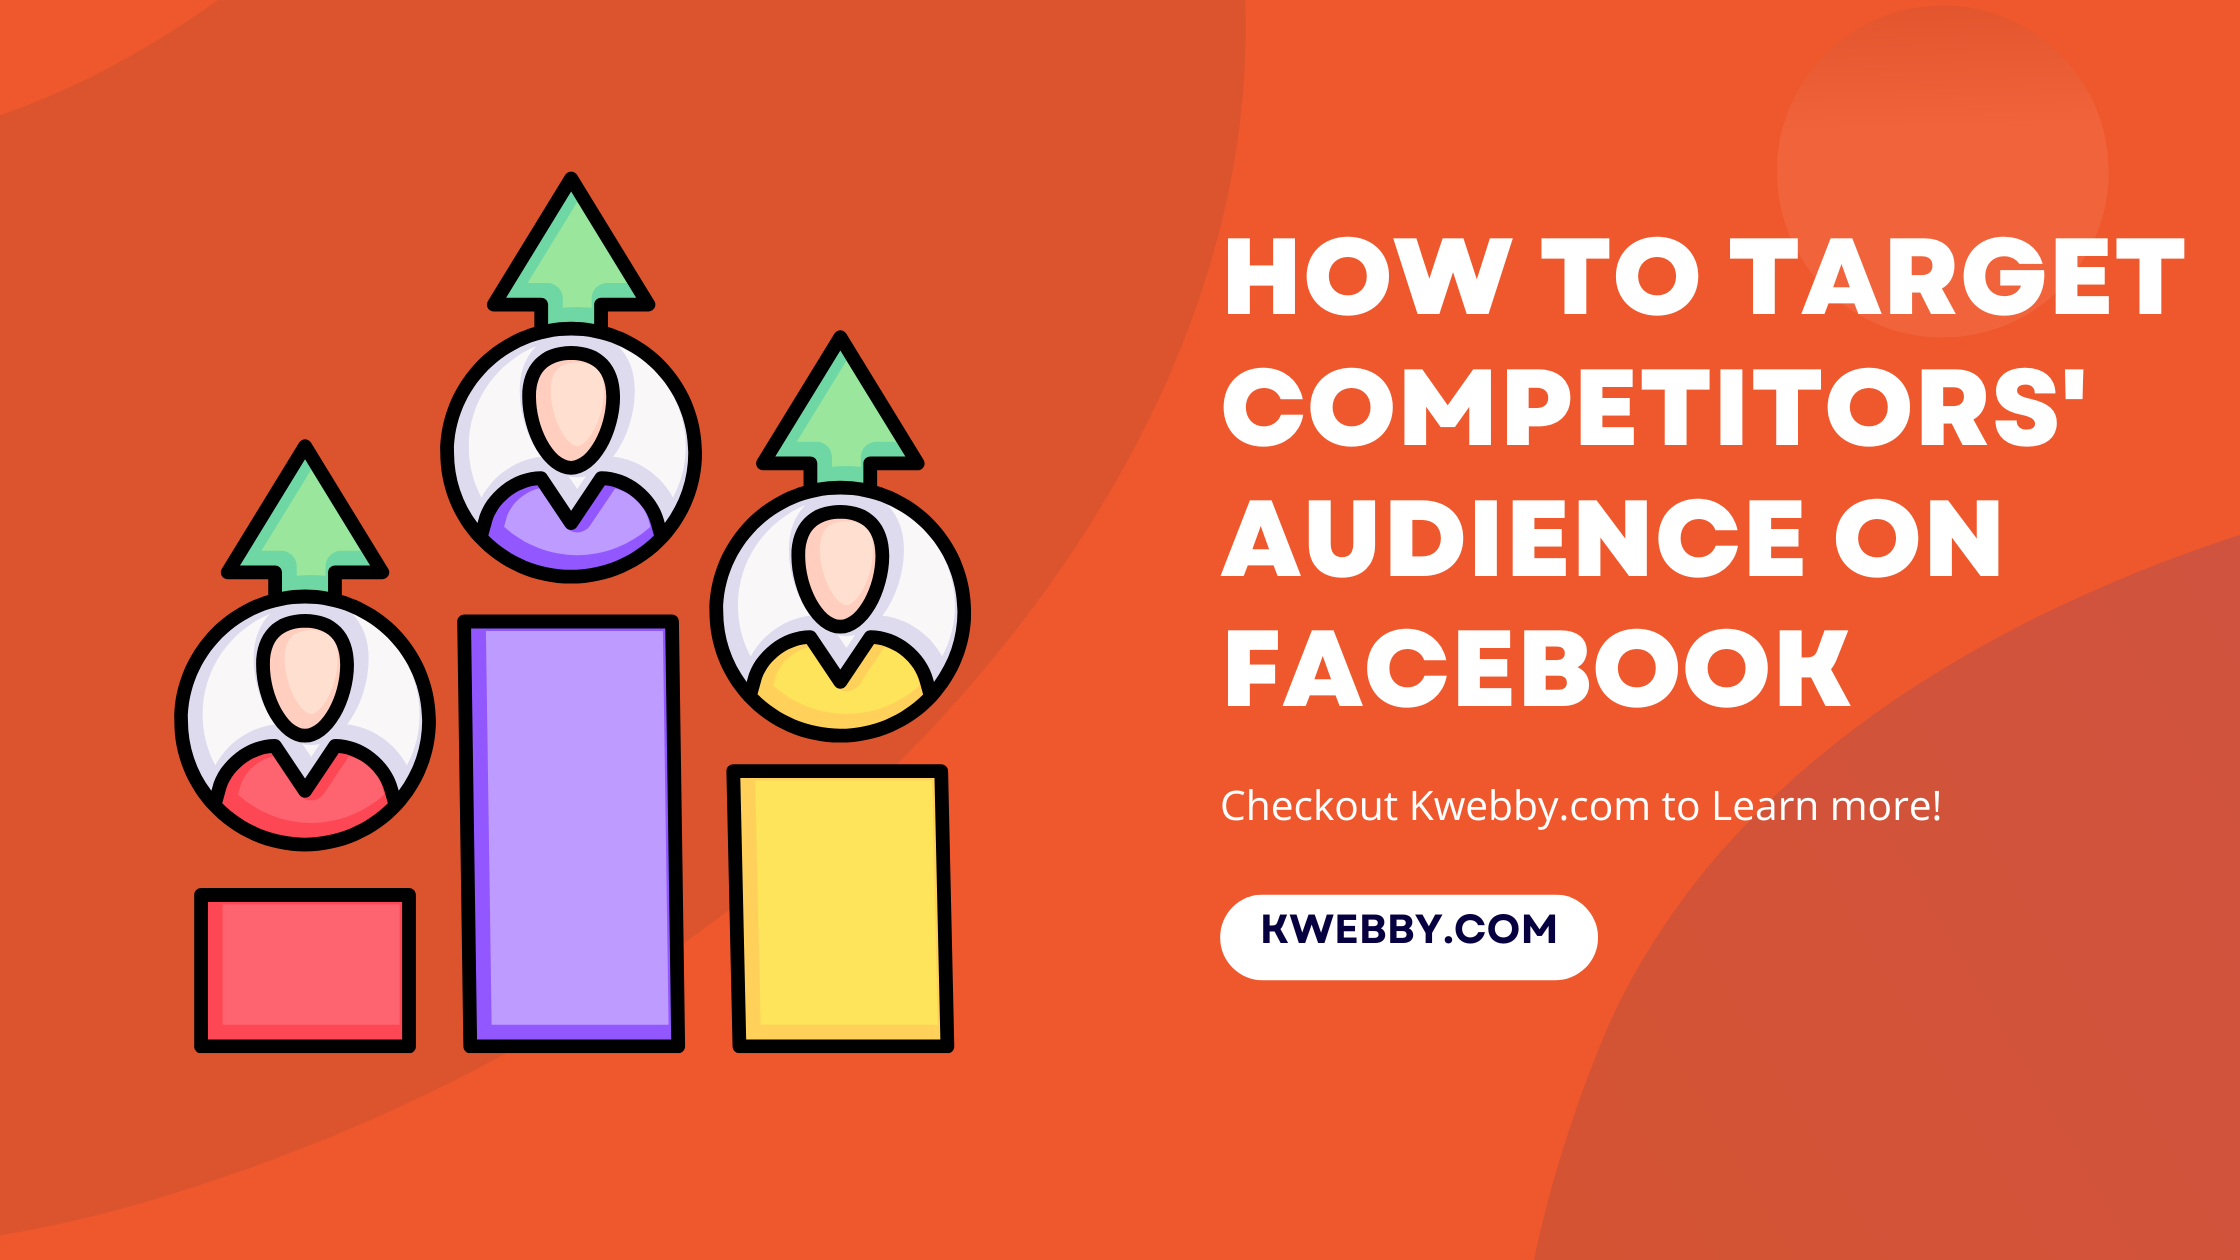 How to target Competitors' Audience on Facebook